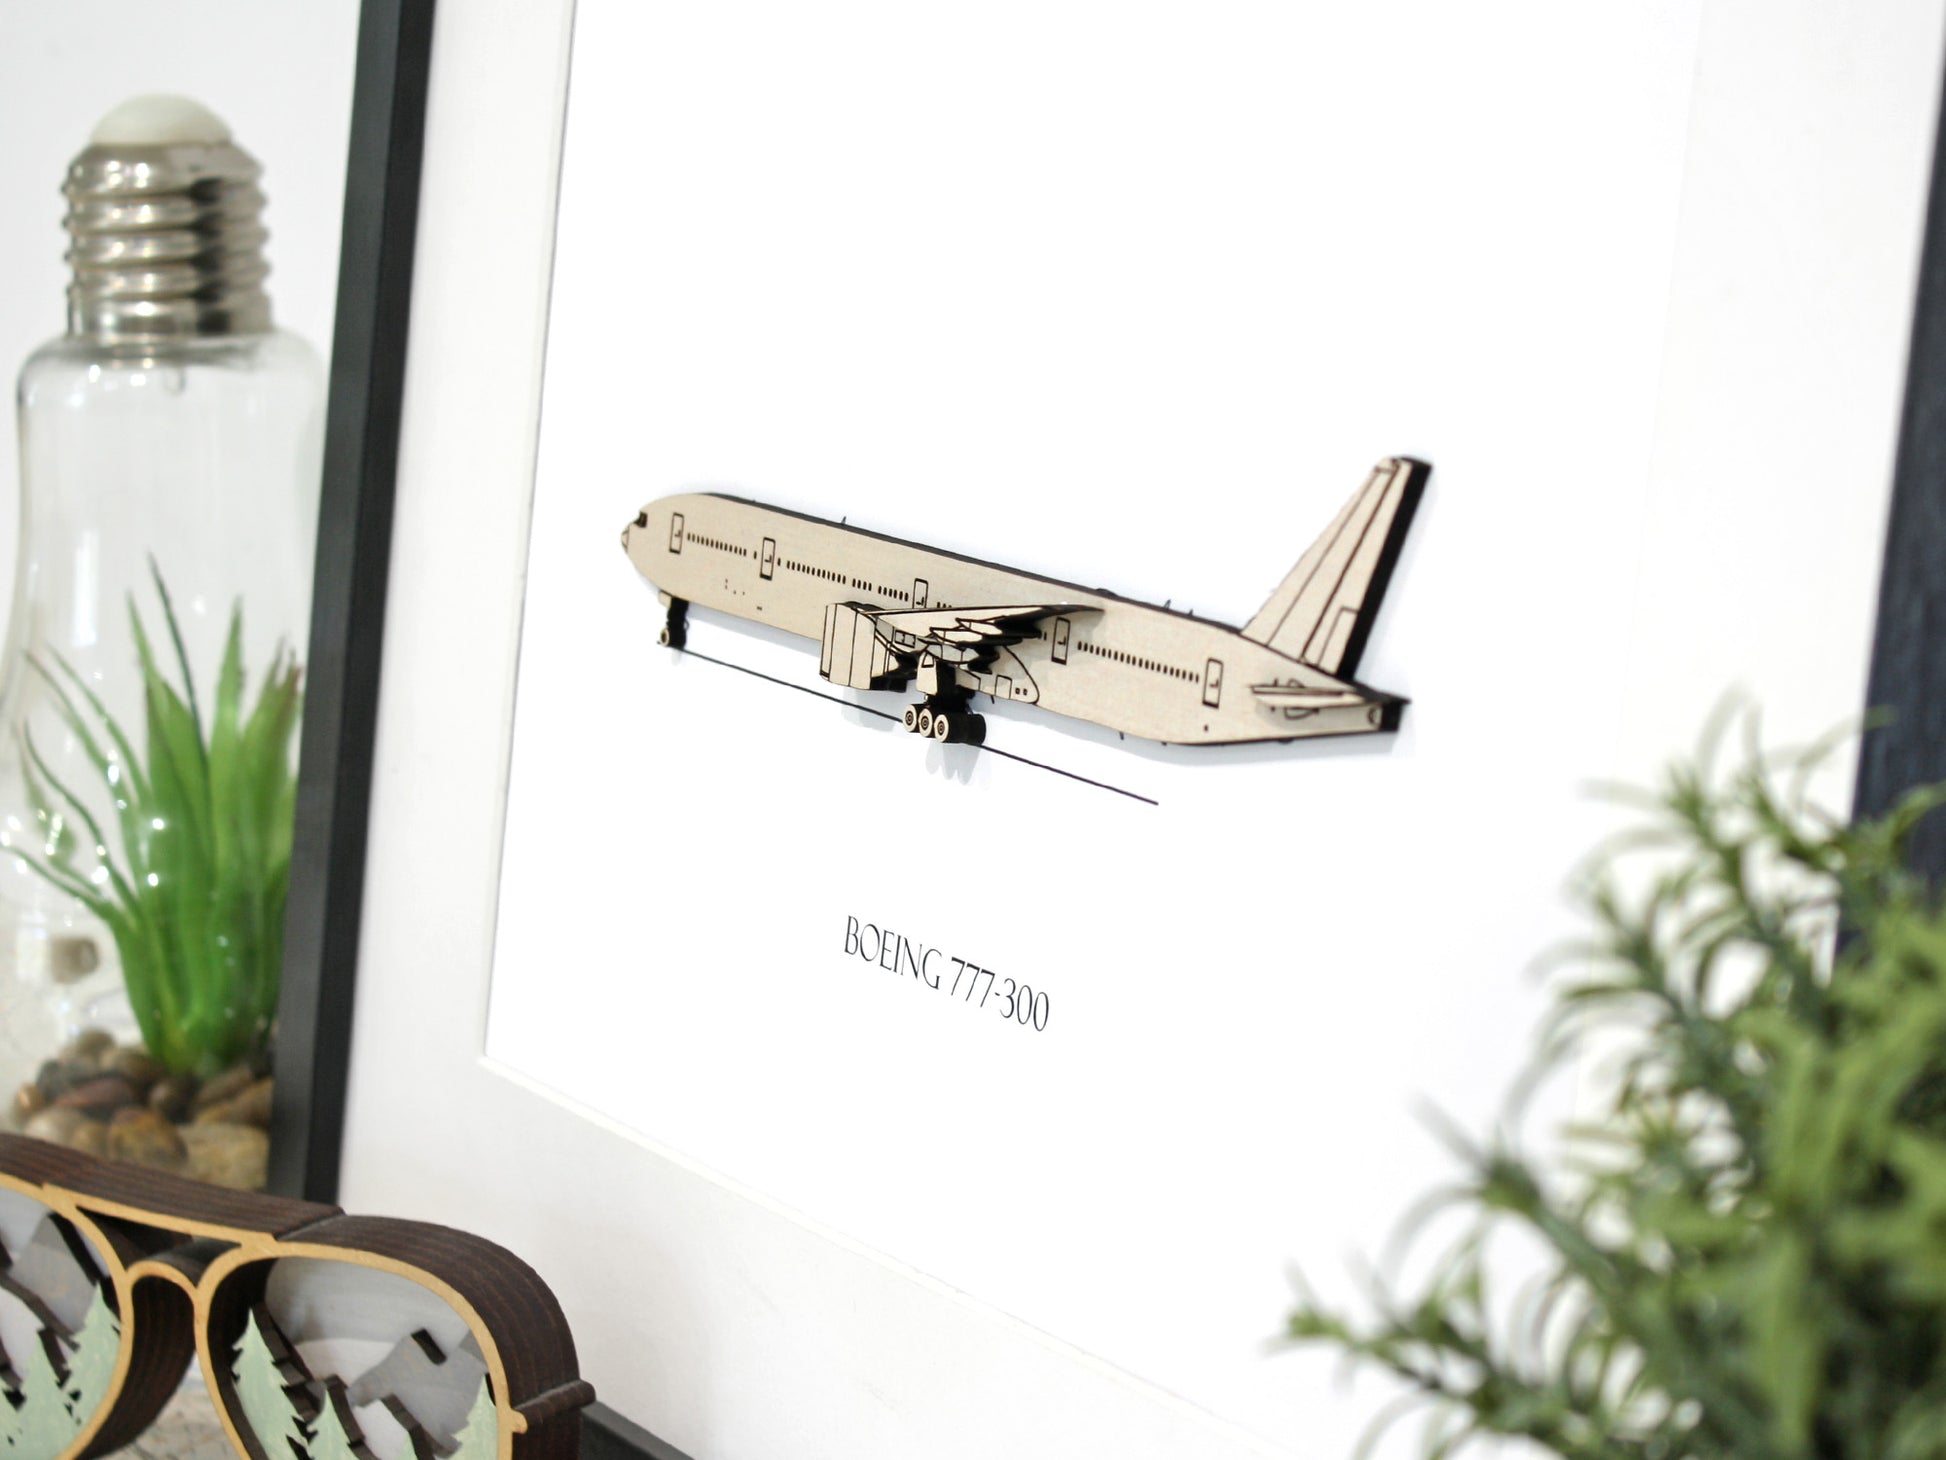 Boeing 777-300 airliner pilot gifts